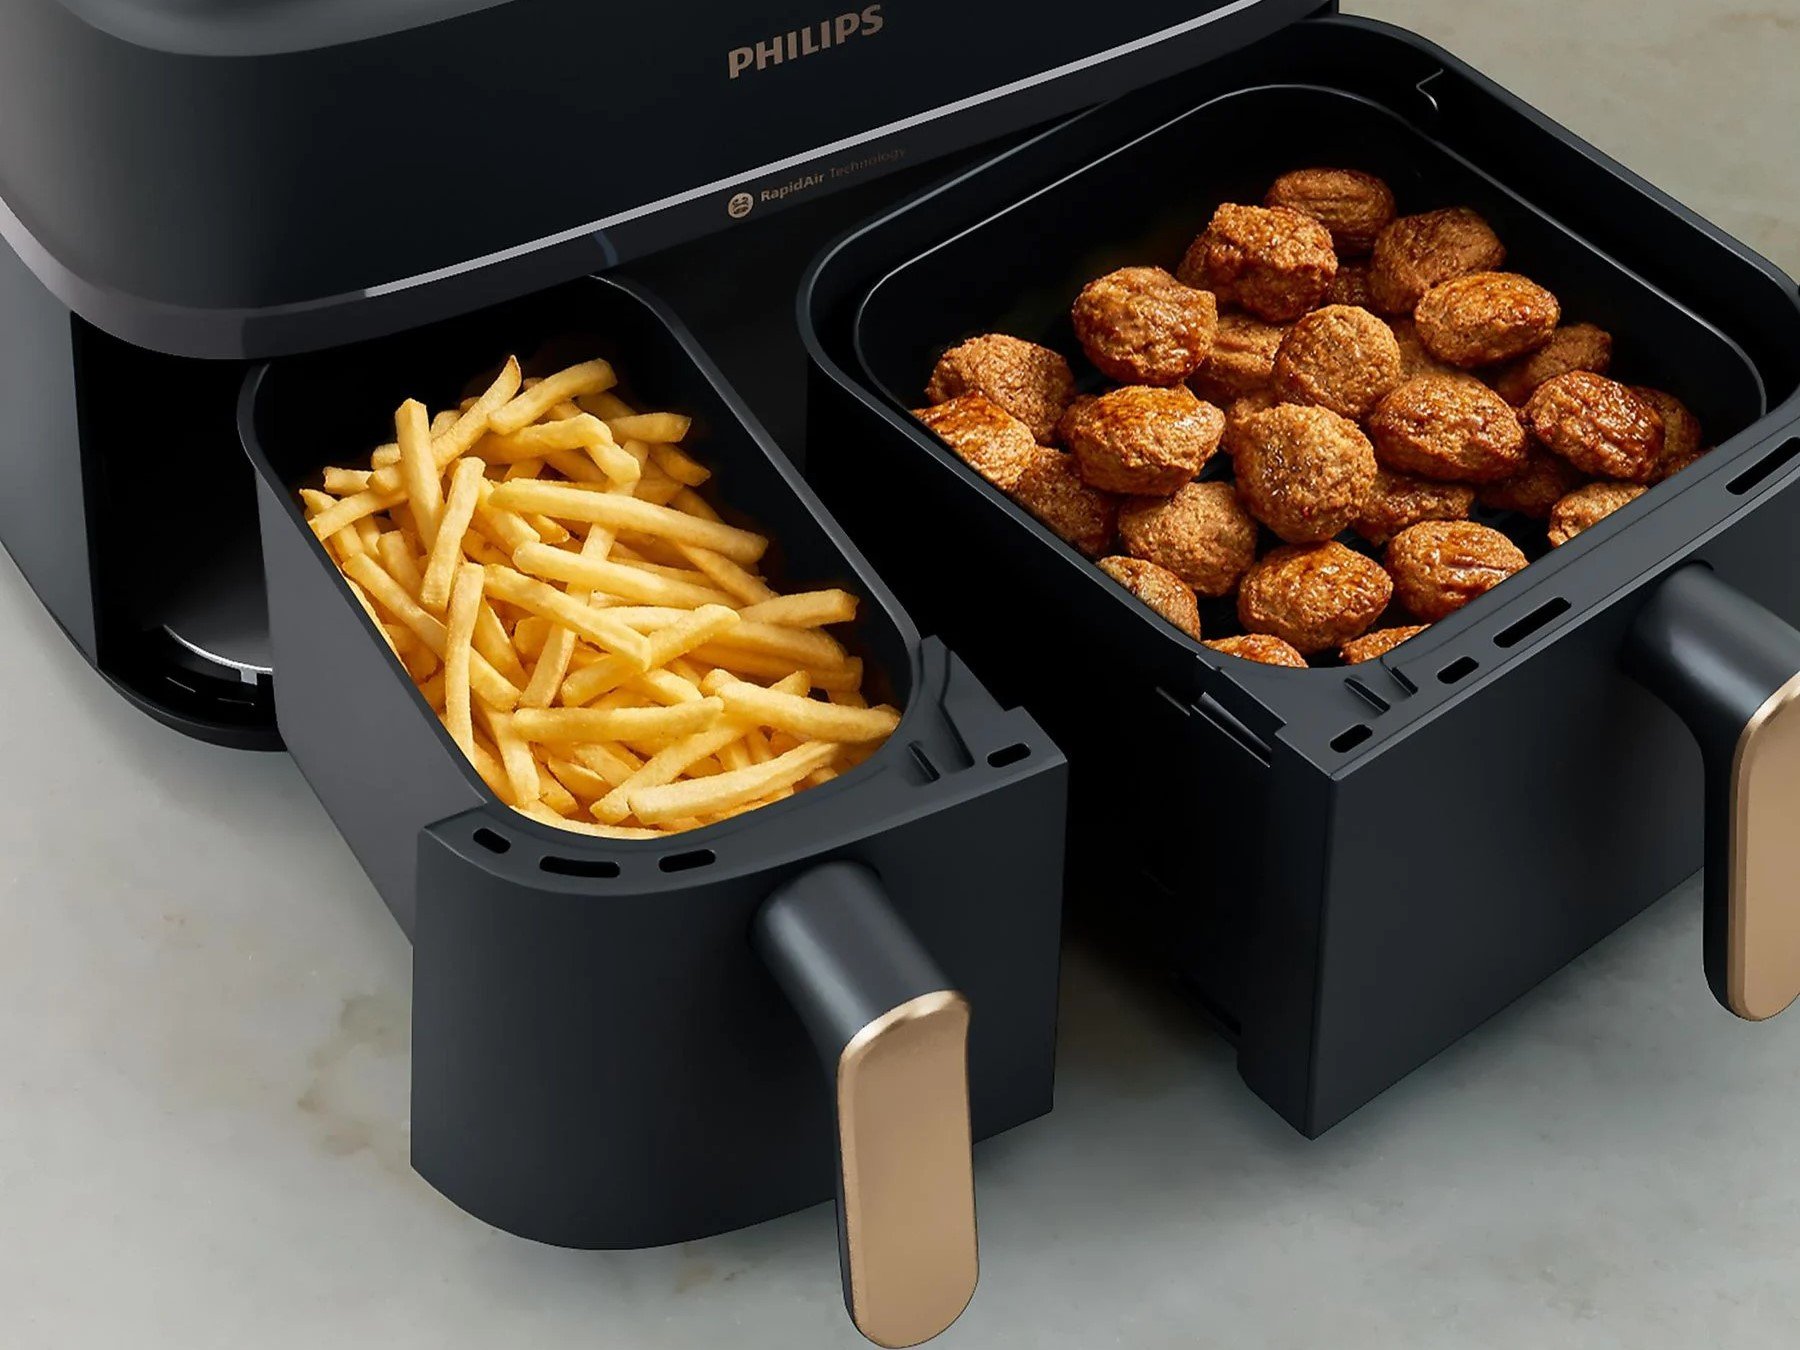 Philips 3000 Series Dual Basket Airfryer with 9-liter capacity unveiled - News - News